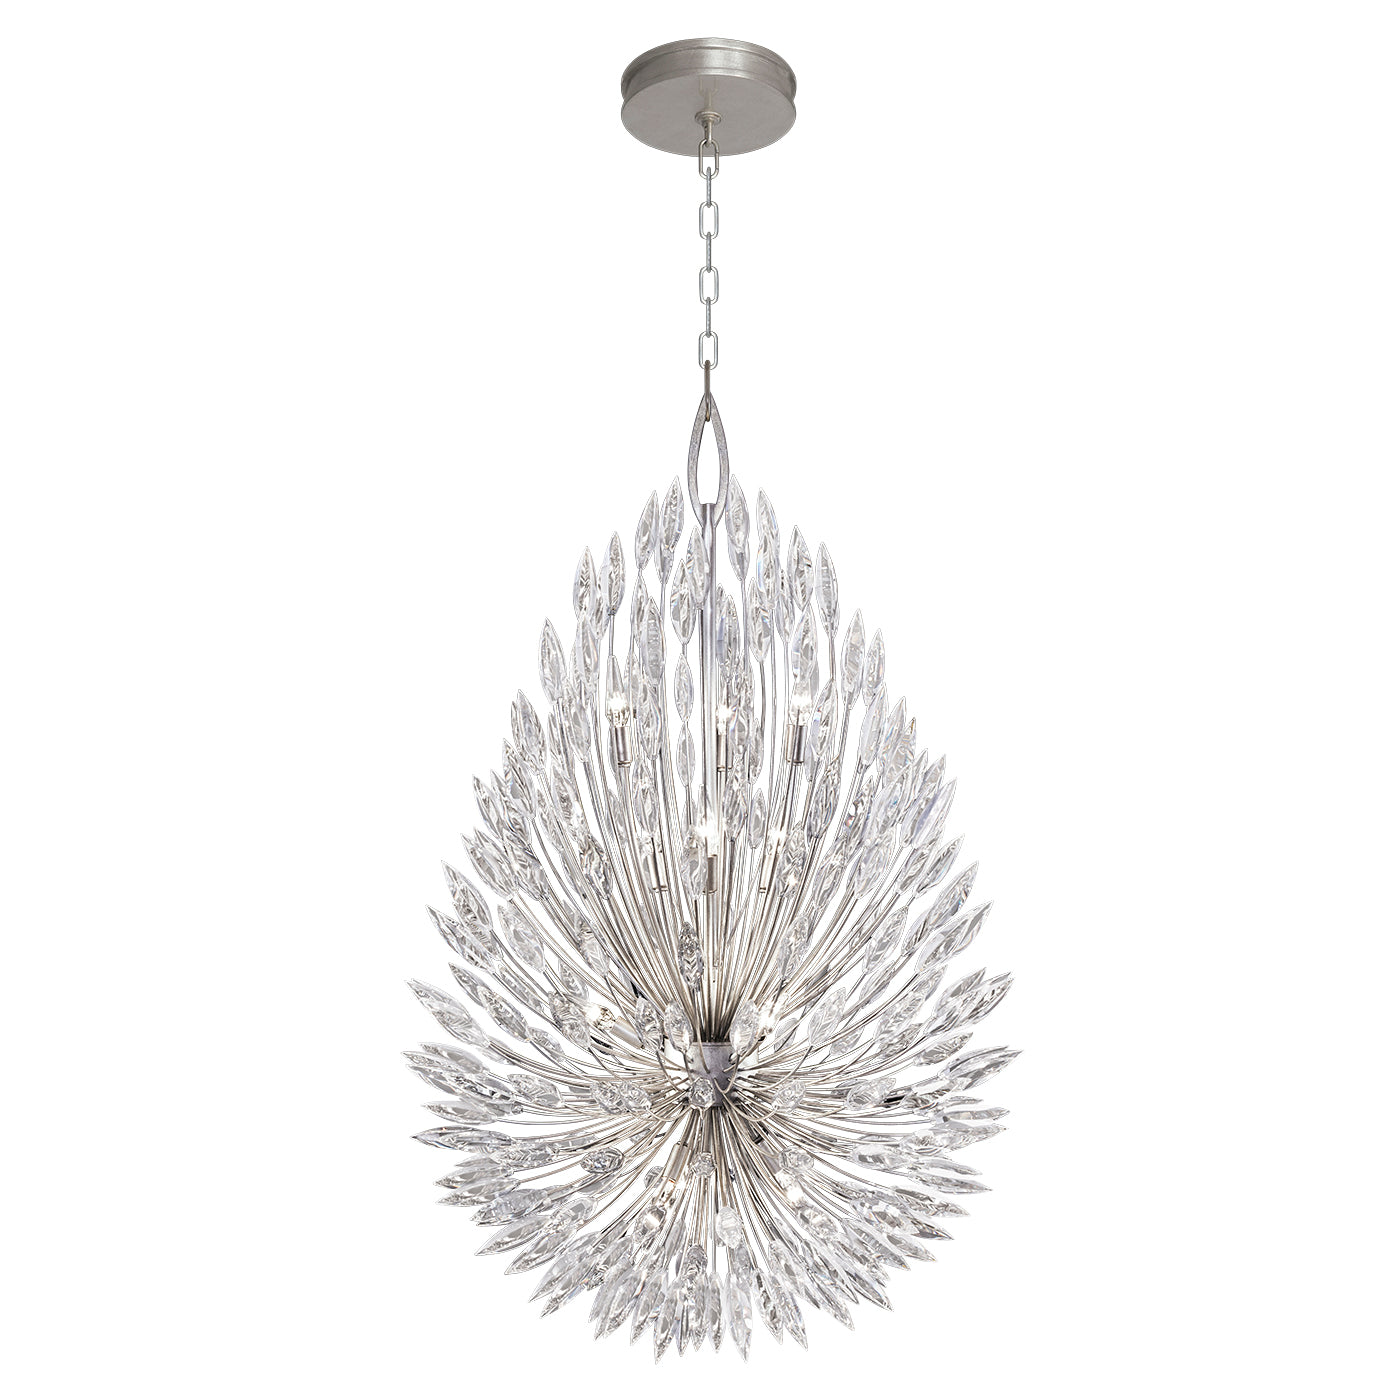 Fine Art Handcrafted Lighting Lily Buds Pendant Chandeliers Fine Art Handcrafted Lighting Silver 33.5 x 52 